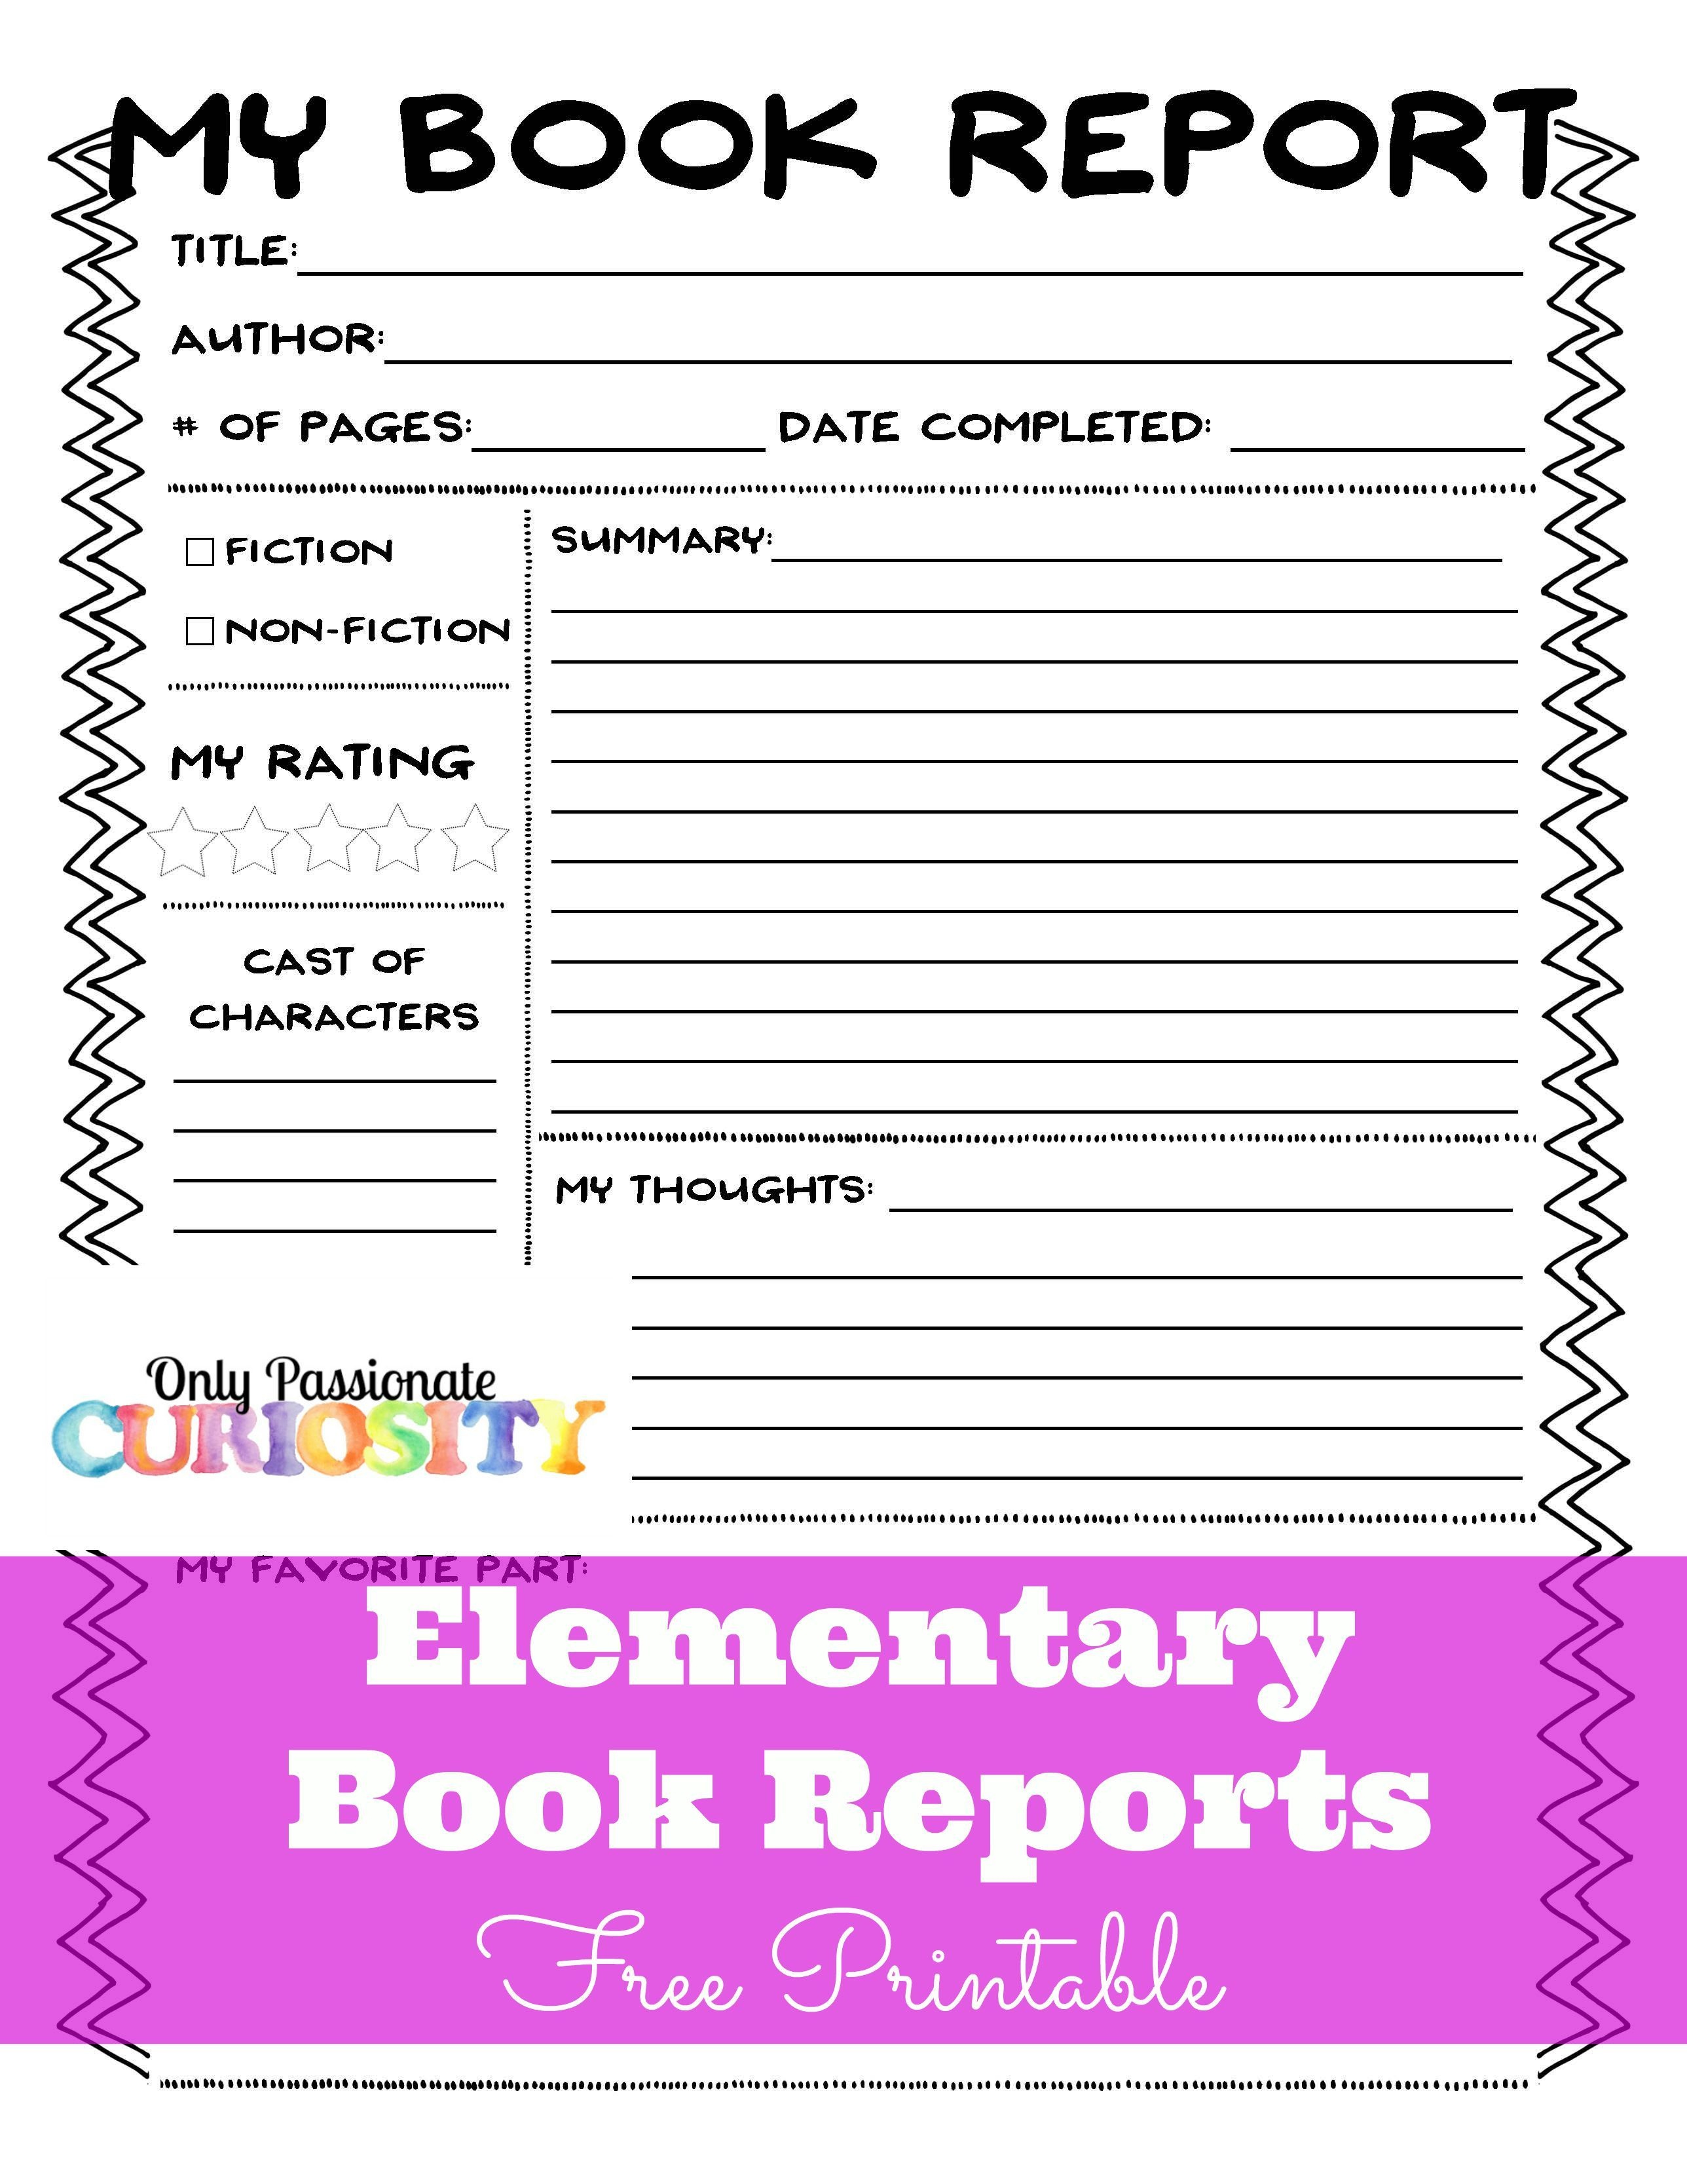 Elementary Book Reports Made Easy | Homeschooling | Book Report - Free Printable Book Report Forms For Elementary Students